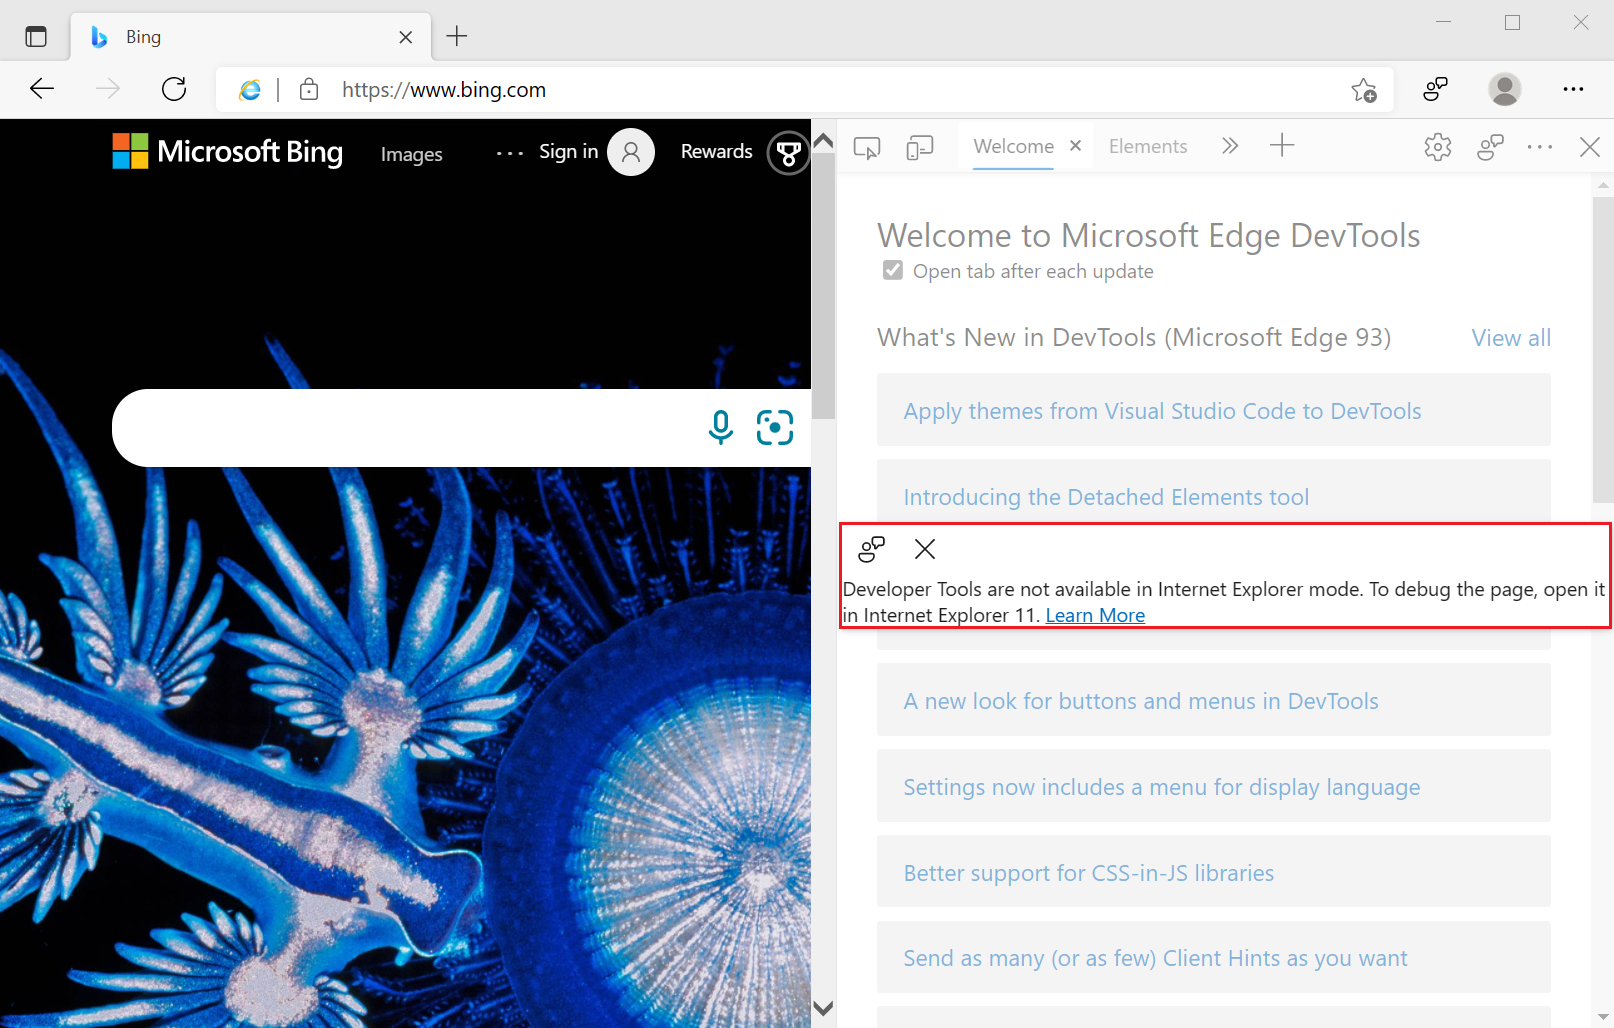 DevTools launched in IE mode